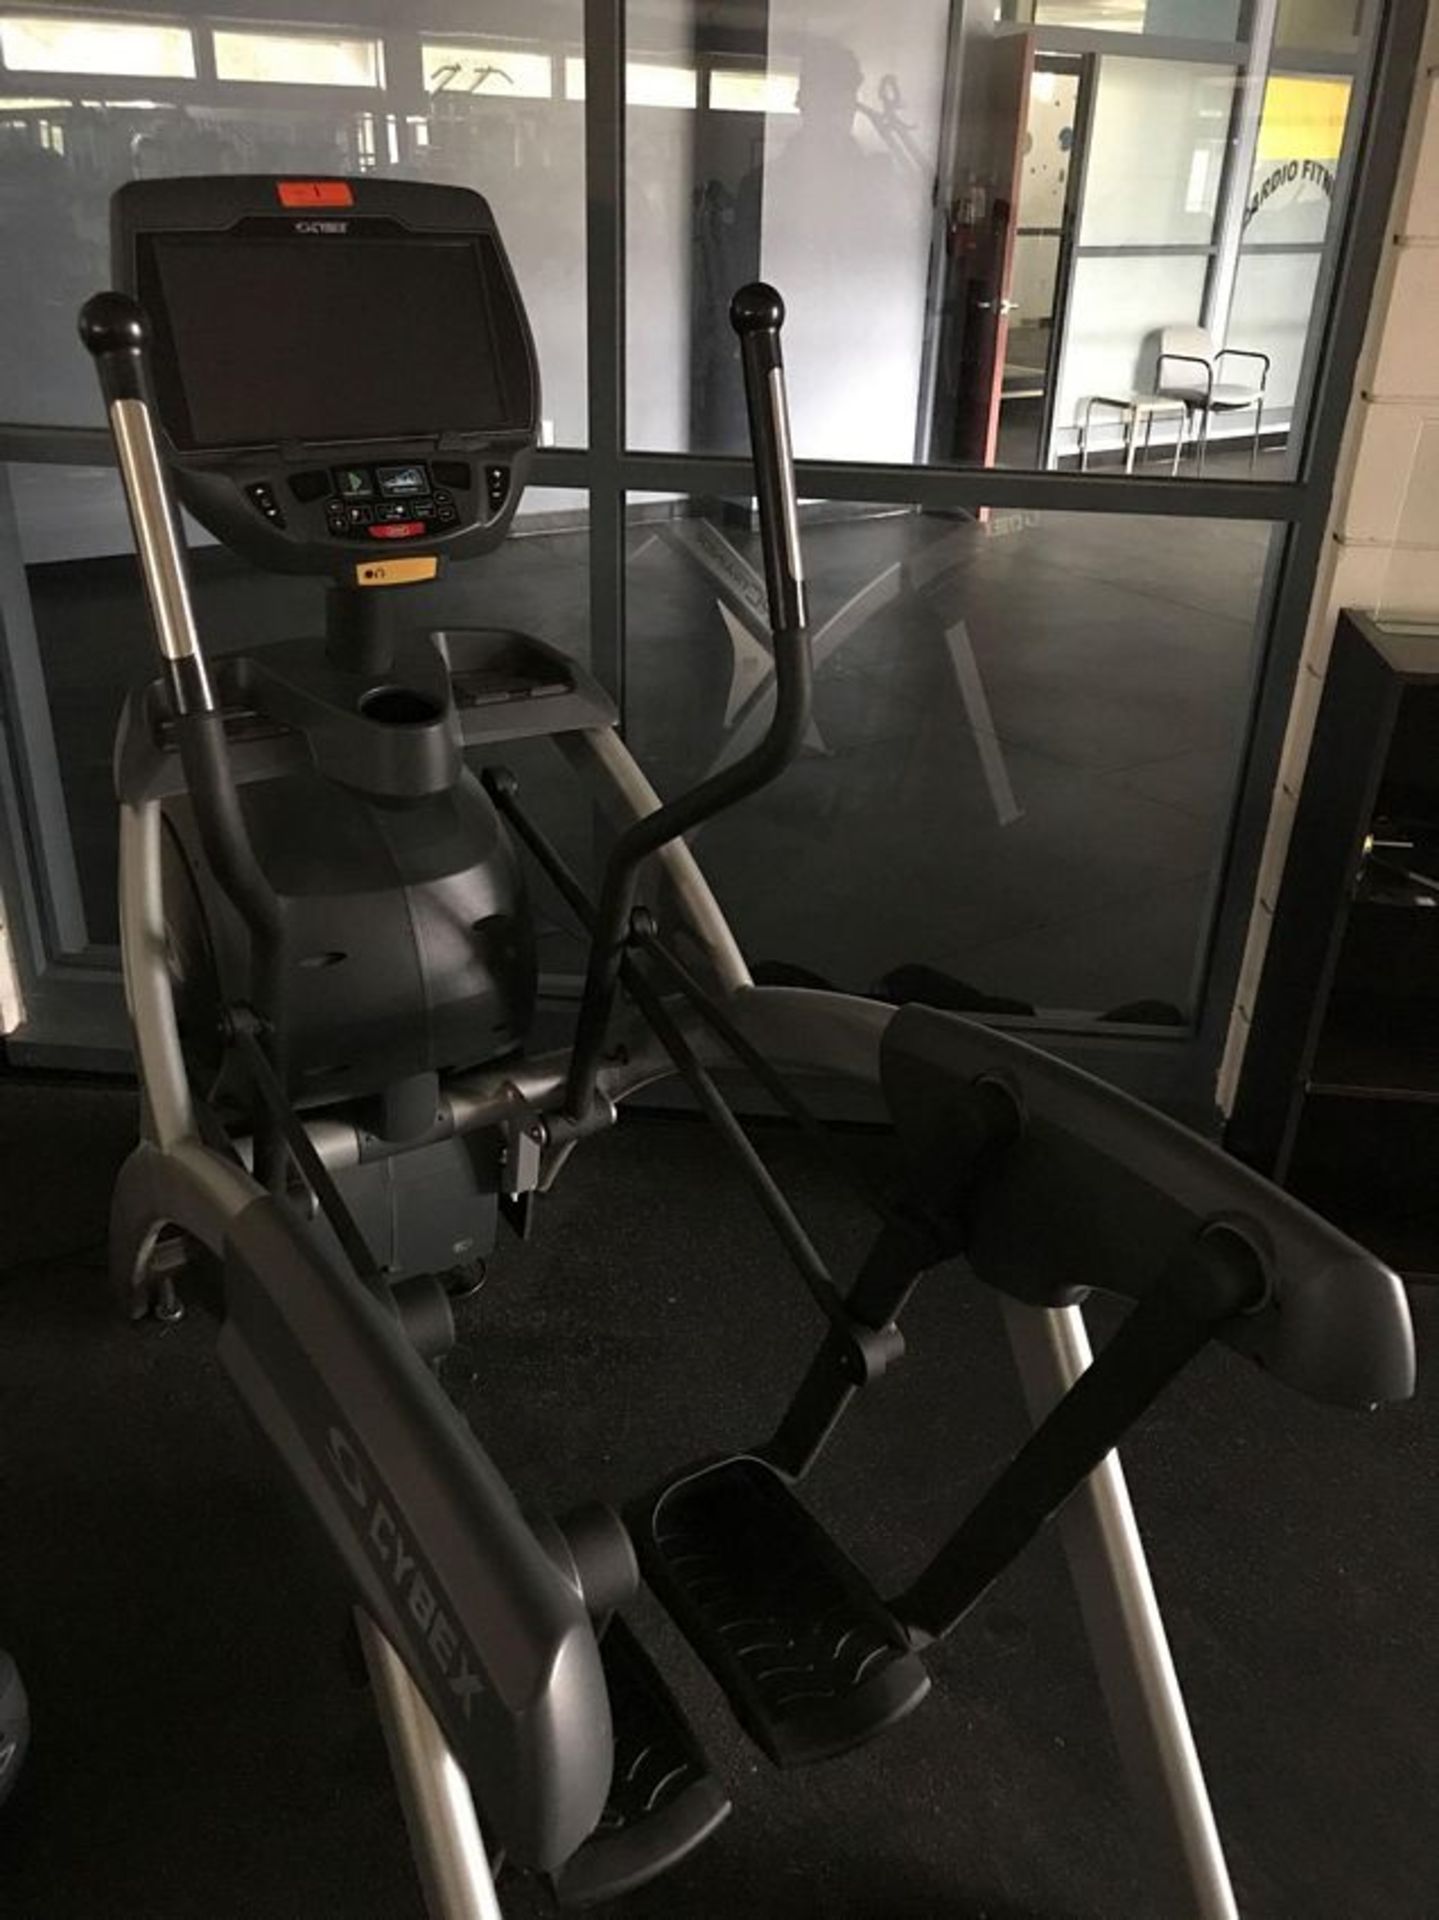 (THIS ITEM NO LONGER FOR INDIVIDUAL SALE) CYBEX 627AT ARC TRAINER ELLIPTICAL